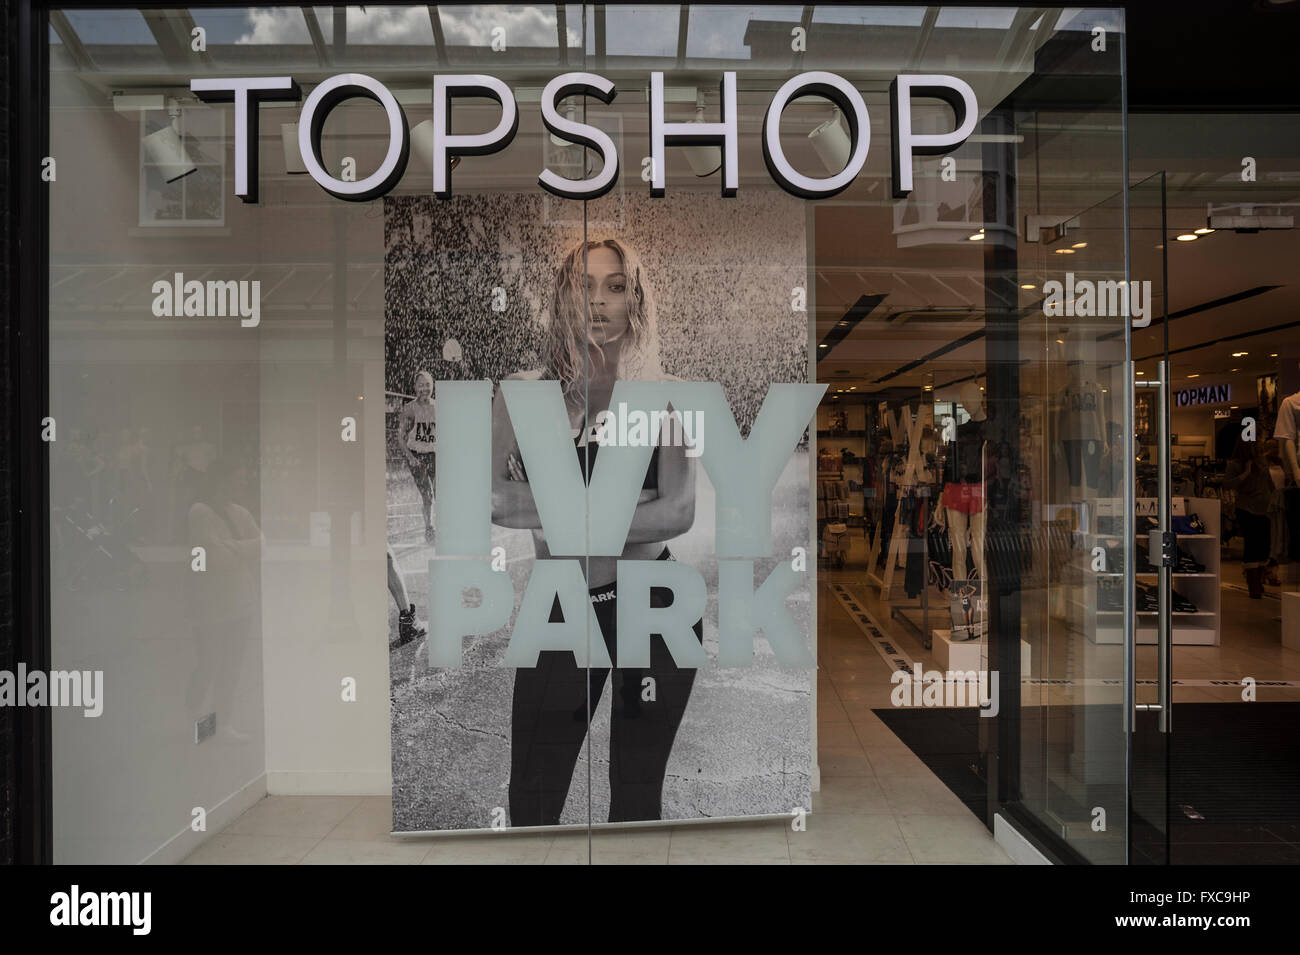 Beyonce's Ivy Park activewear clothing brand launches nationwide in Topshop  stores in the UK today 14th April 2016. Topshop Sailsbury, Wiltshire  Credit: Rob Wilkinson/Alamy Live News Stock Photo - Alamy